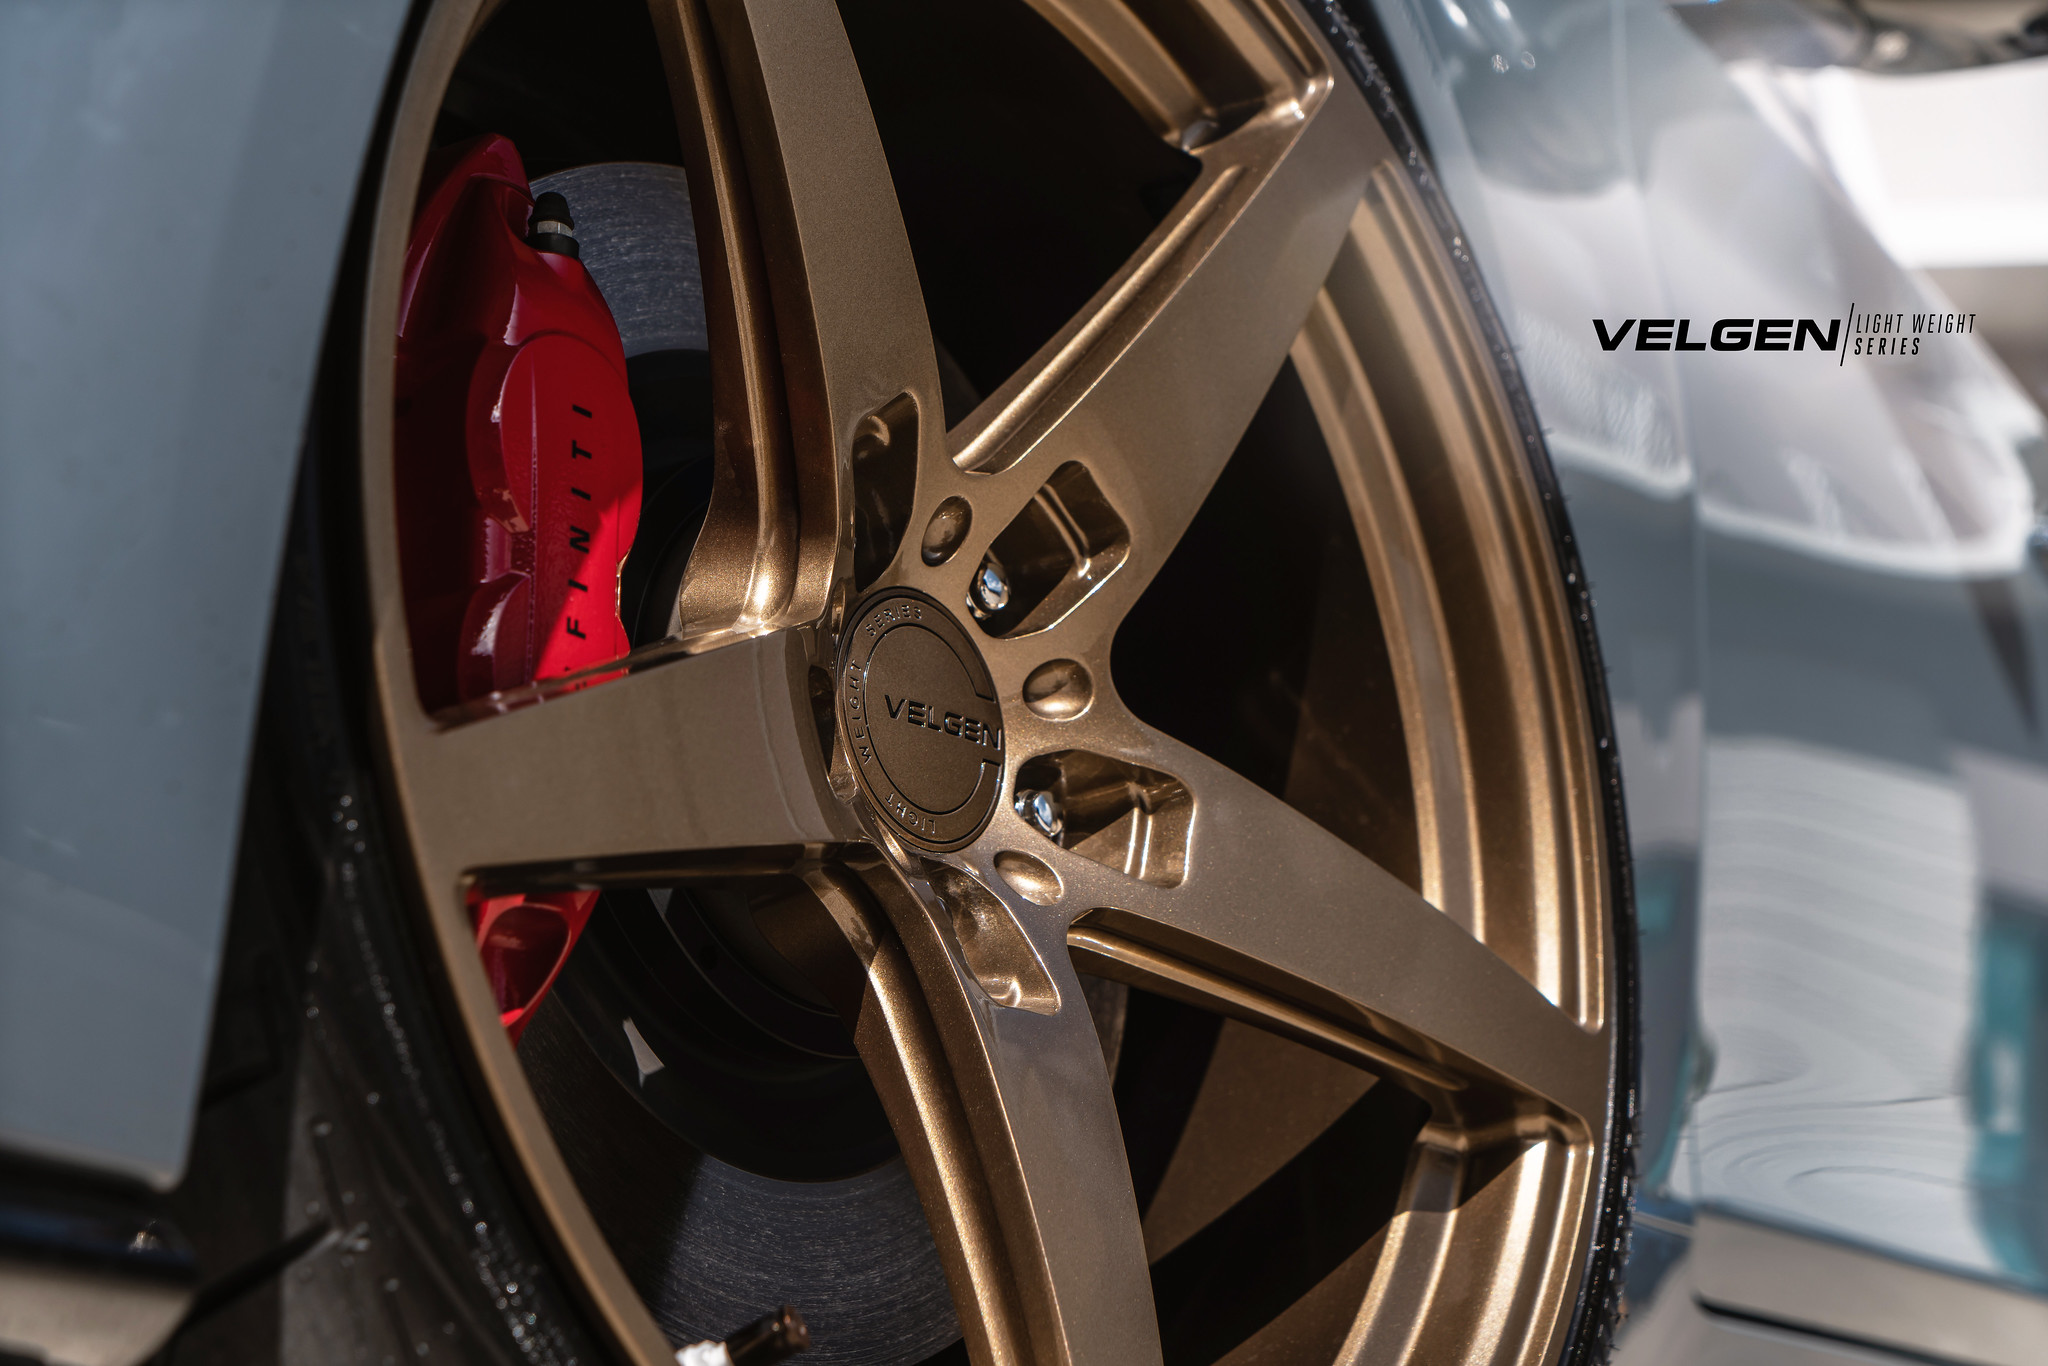 S650 Mustang 19" 20" Velgen Flow Forged Concave Wheels Mustang S650 - Vibe Motorsports Official Thread 52033335332_f4b059a3a8_k